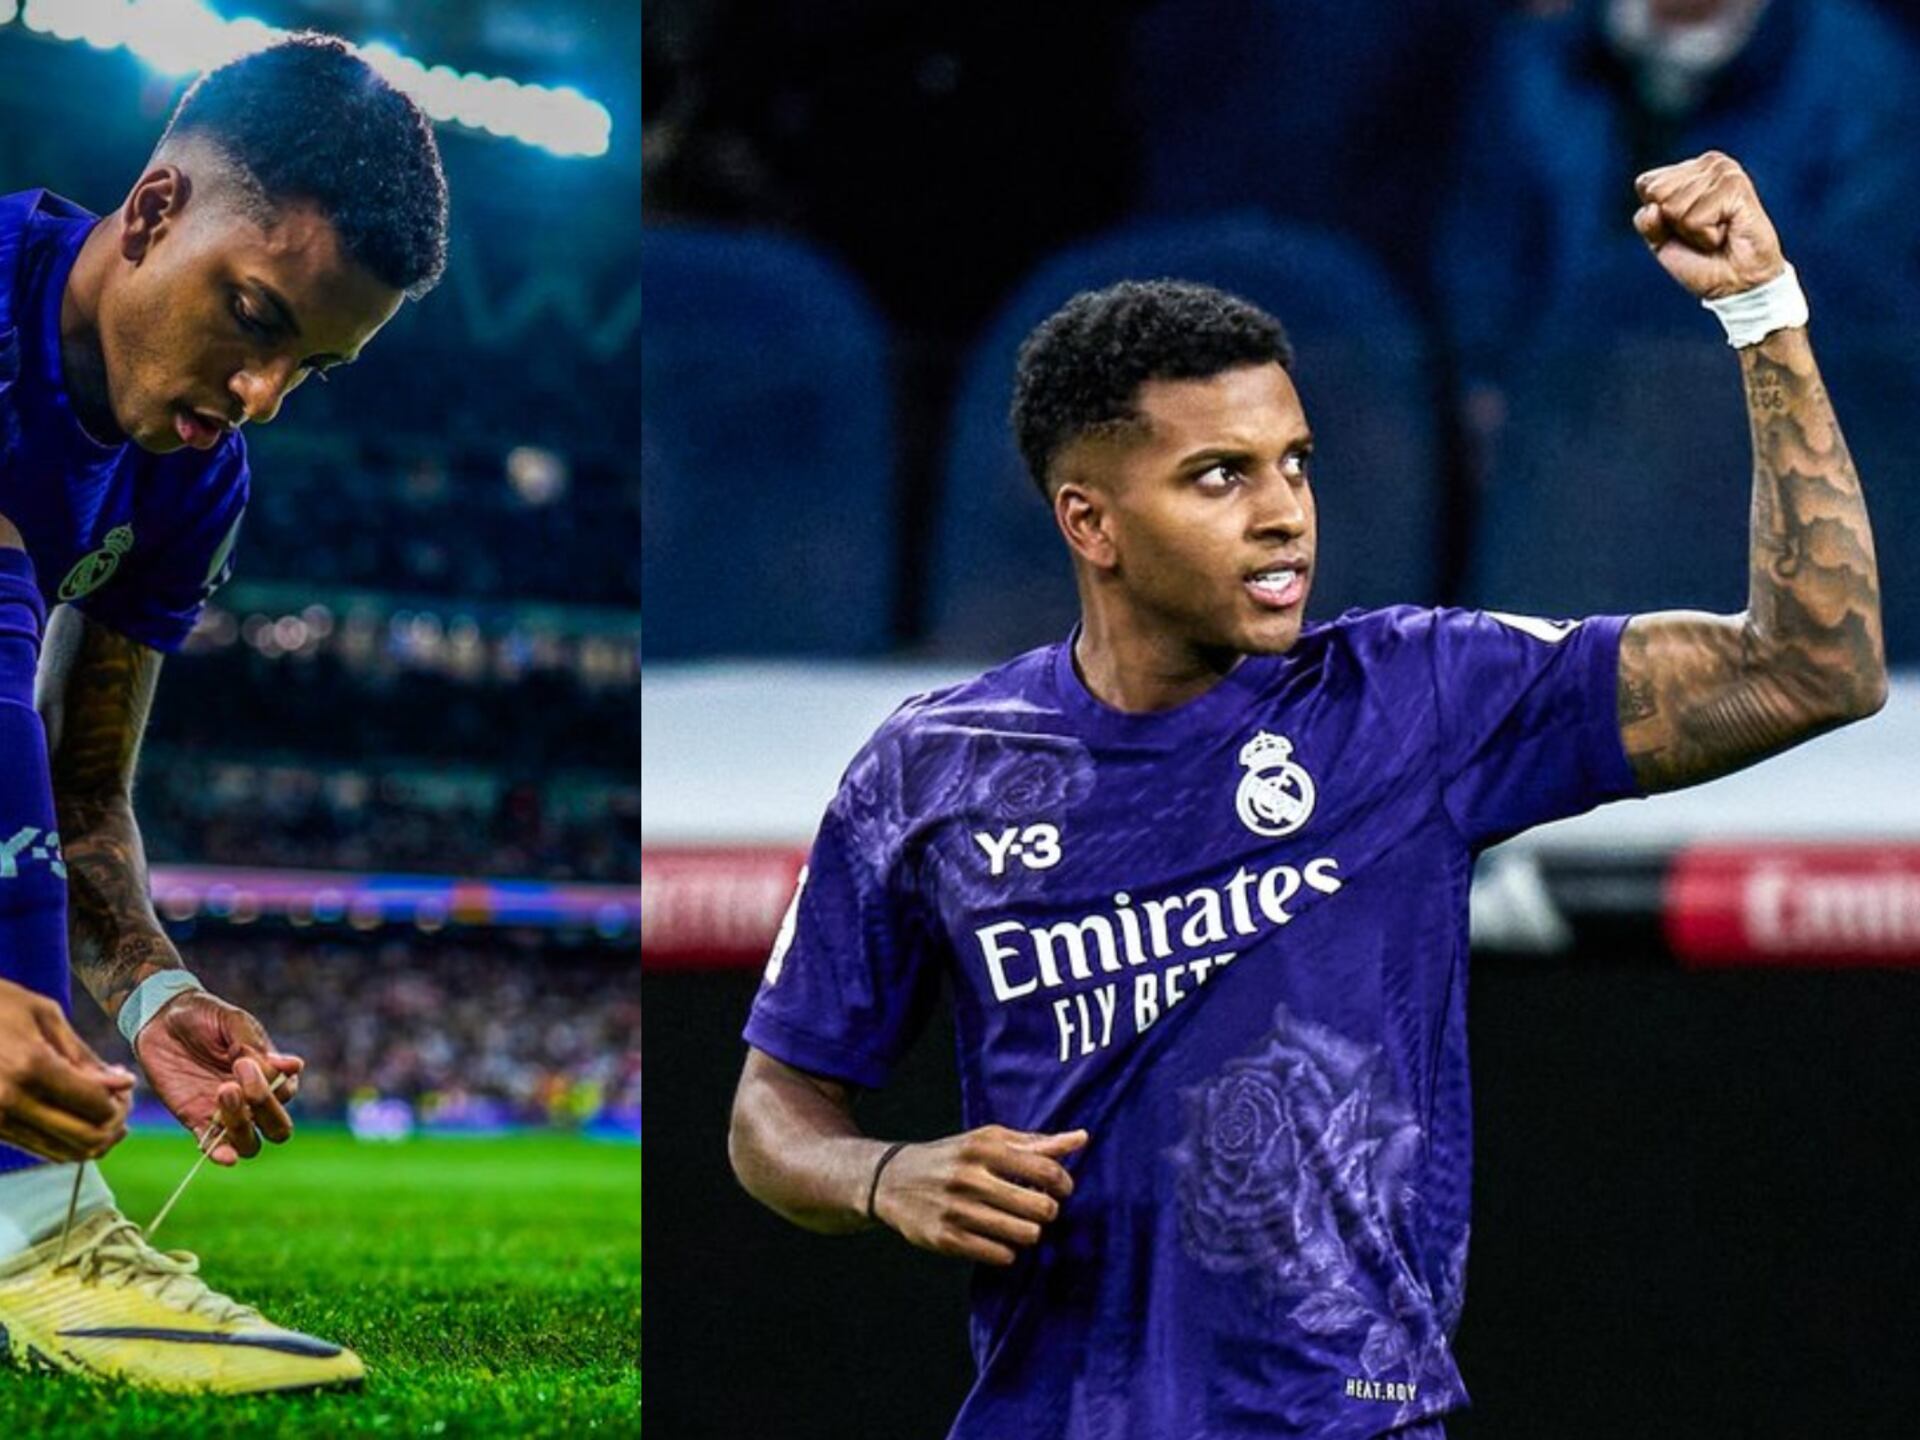 No Vini, no problem; Rodrygo guides Real Madrid to another win with his brace